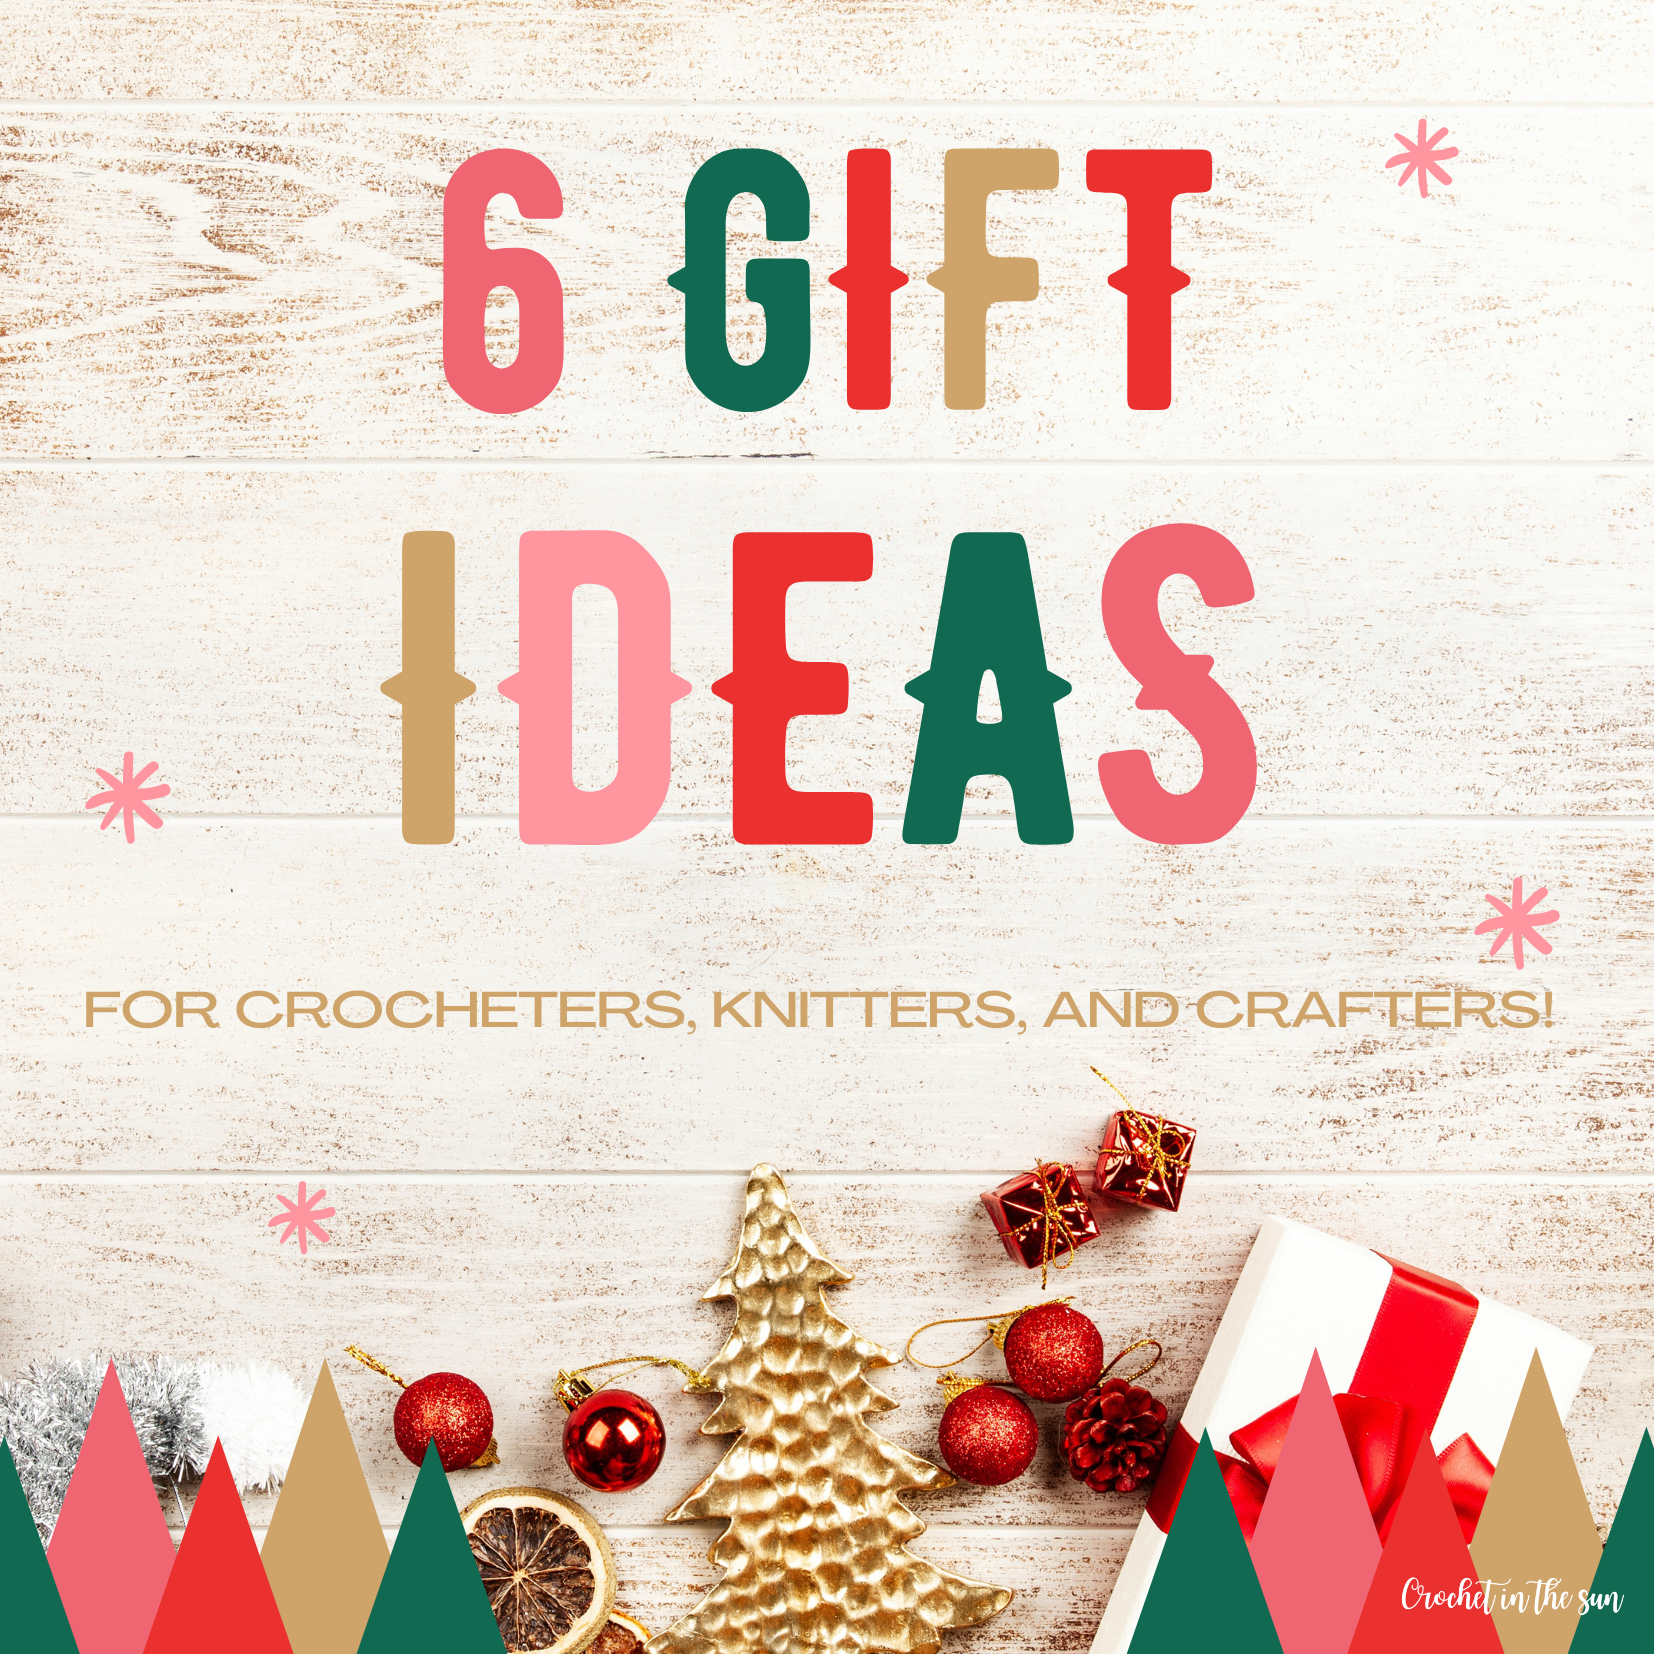 Christmas gift ideas if she's a crafter or crocheter. 6 great ideas!